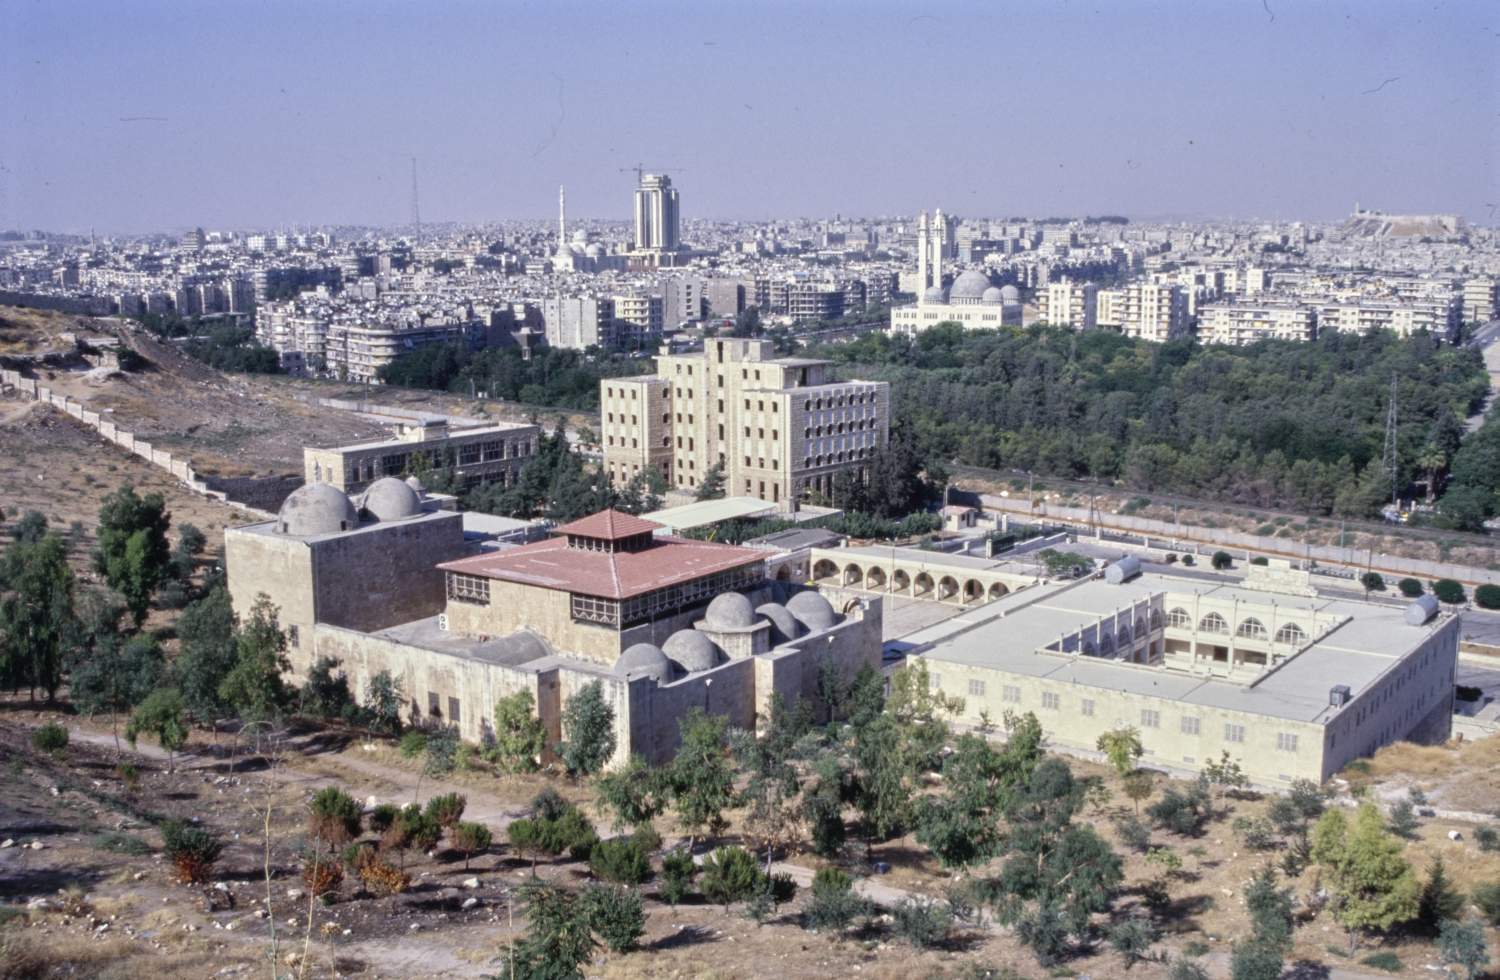 General view from southwest showing Aleppo City in background